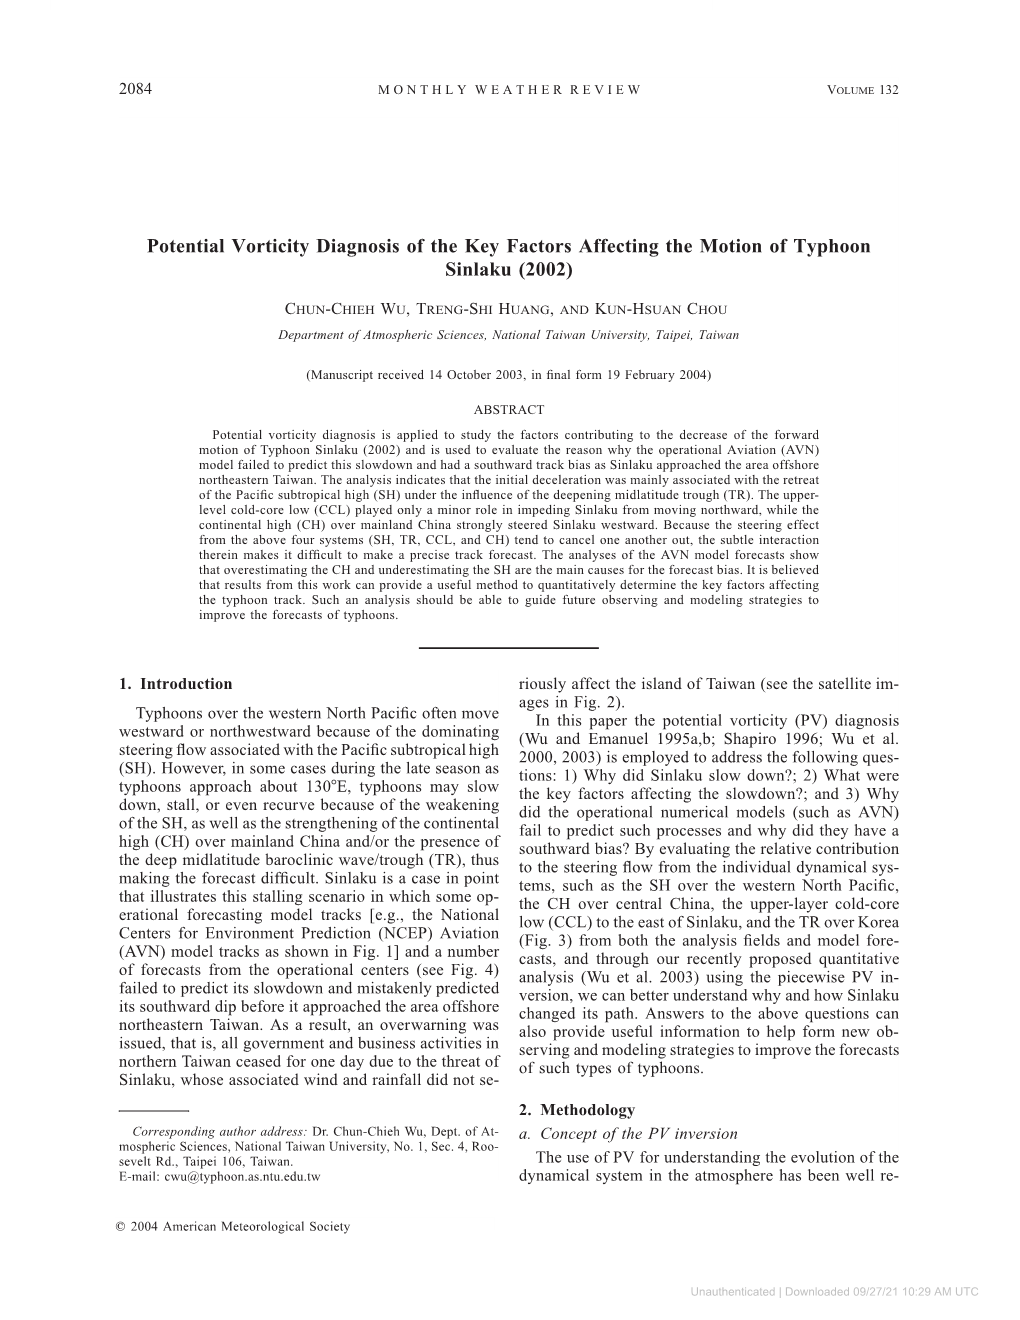 Potential Vorticity Diagnosis of the Key Factors Affecting the Motion of Typhoon Sinlaku (2002)